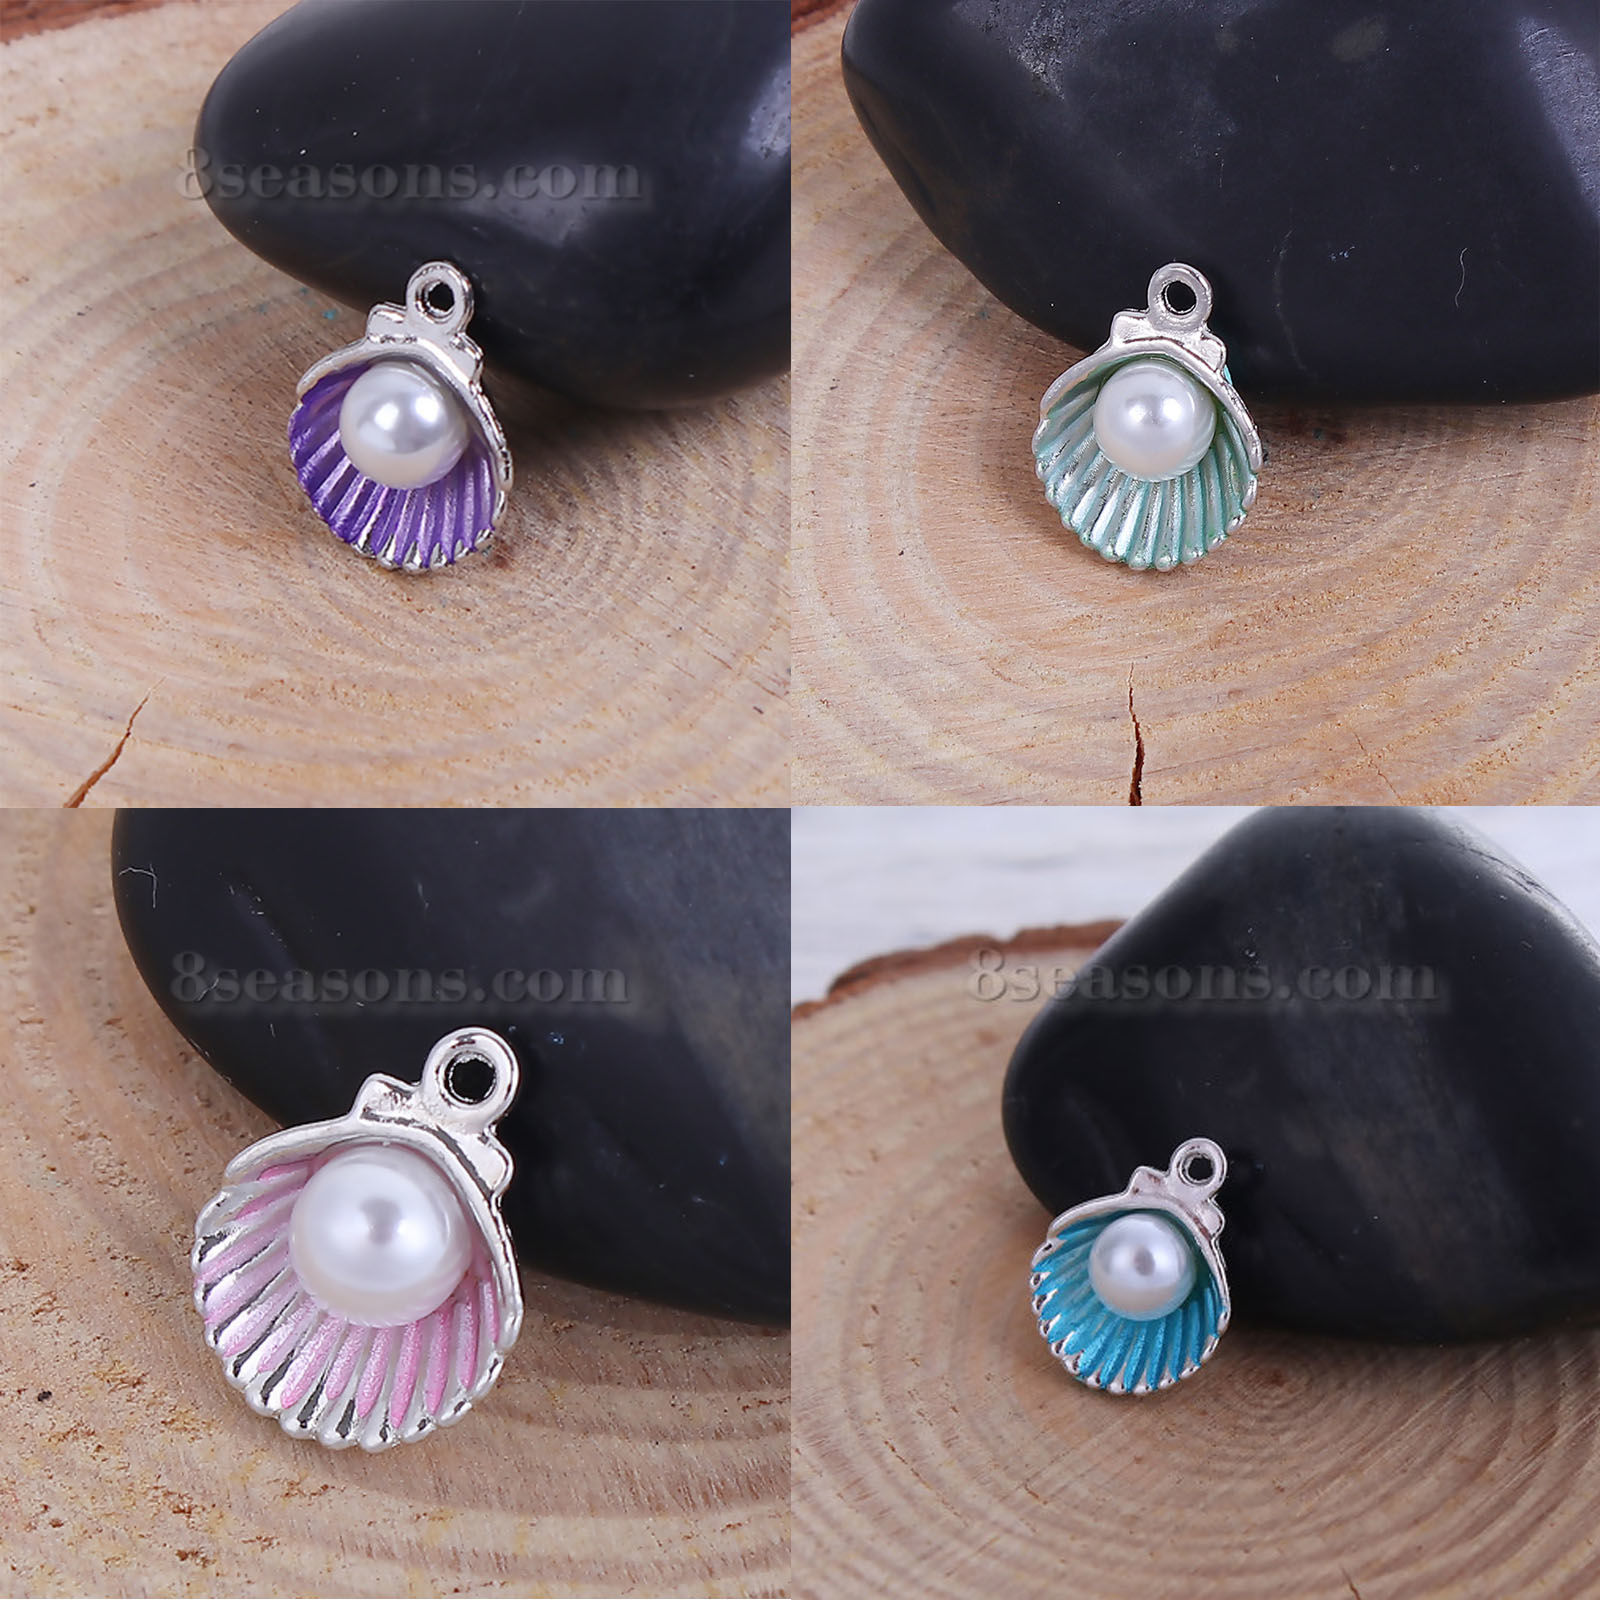 Picture of Zinc Based Alloy One Pearl Jewelry Charms Shell Silver Tone White & Green Acrylic Imitation Pearl 15mm( 5/8") x 12mm( 4/8"), 20 PCs